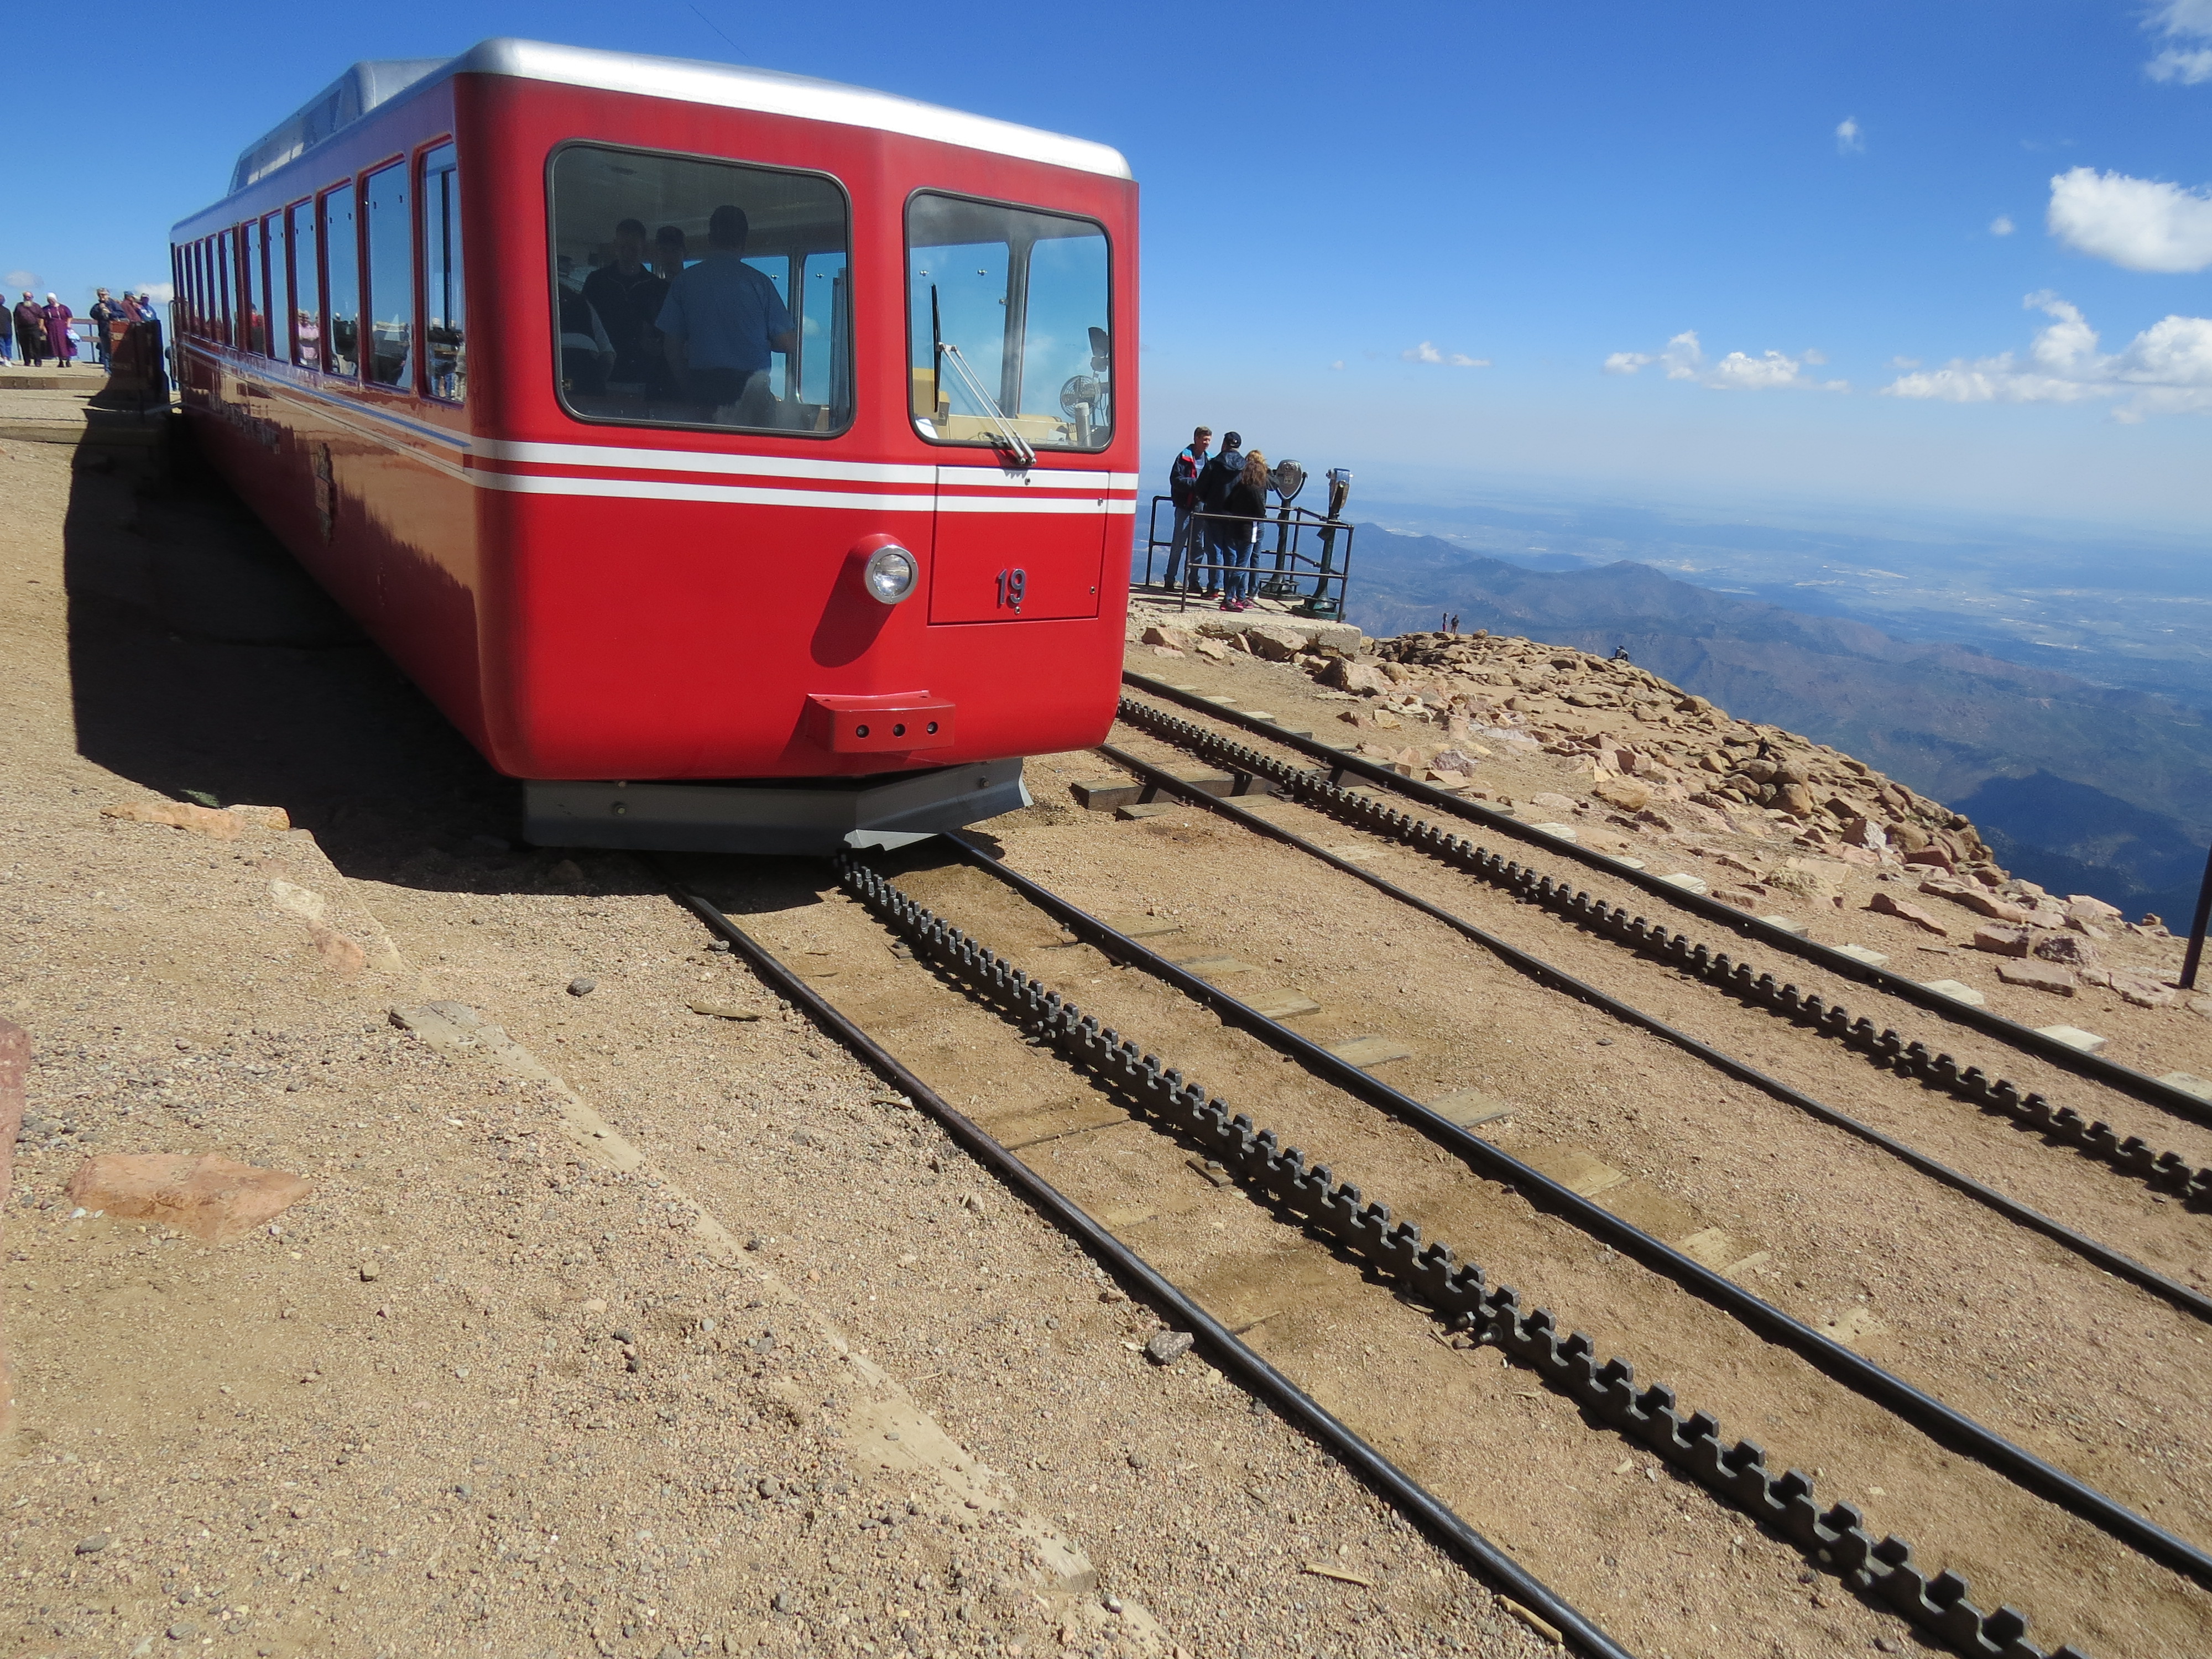 Cog train at Pikes Peak, CO.  A cog train can travel up grades greater than 10%.  The Pikes Peak Cog Train's greatest ascent is 25% grade. A new cog train is to be completed sometime in 2021. 